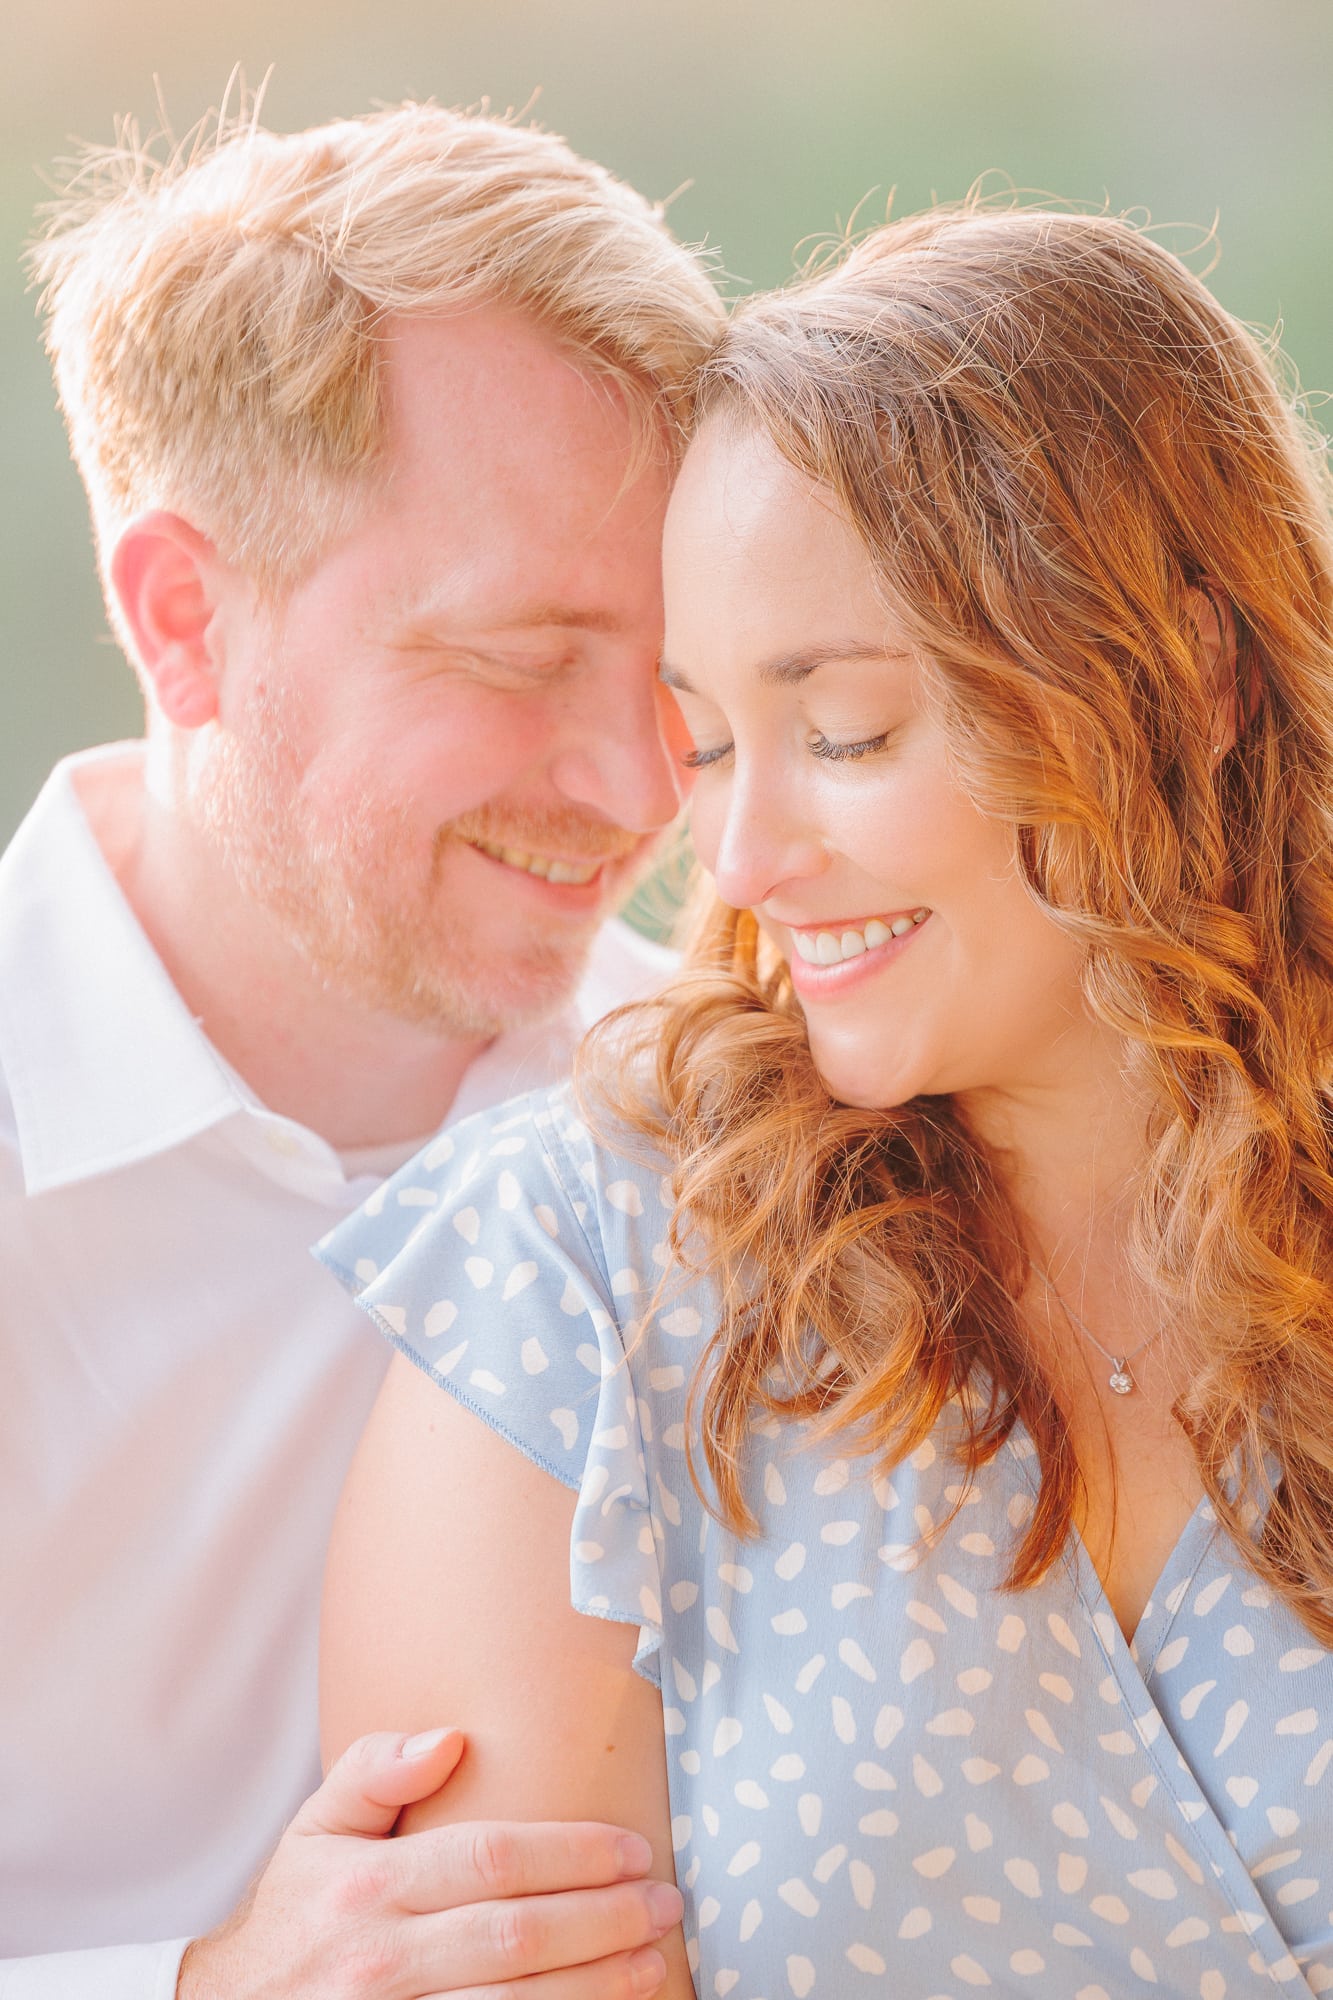 The couple's laughter fills the air at North Corner Haven during their engagement shoot.